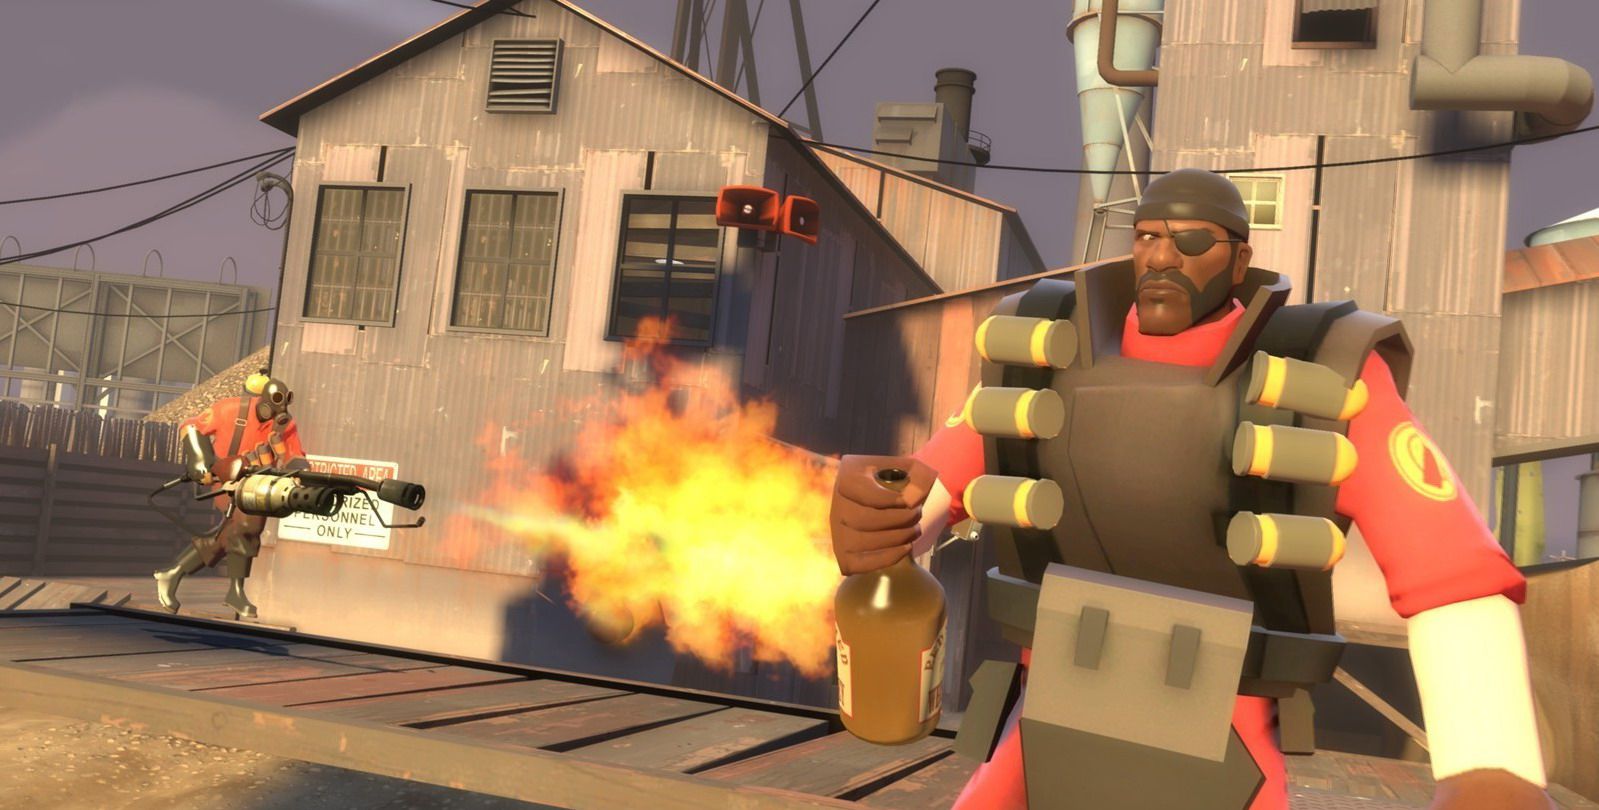 Team fortress 2 image 4